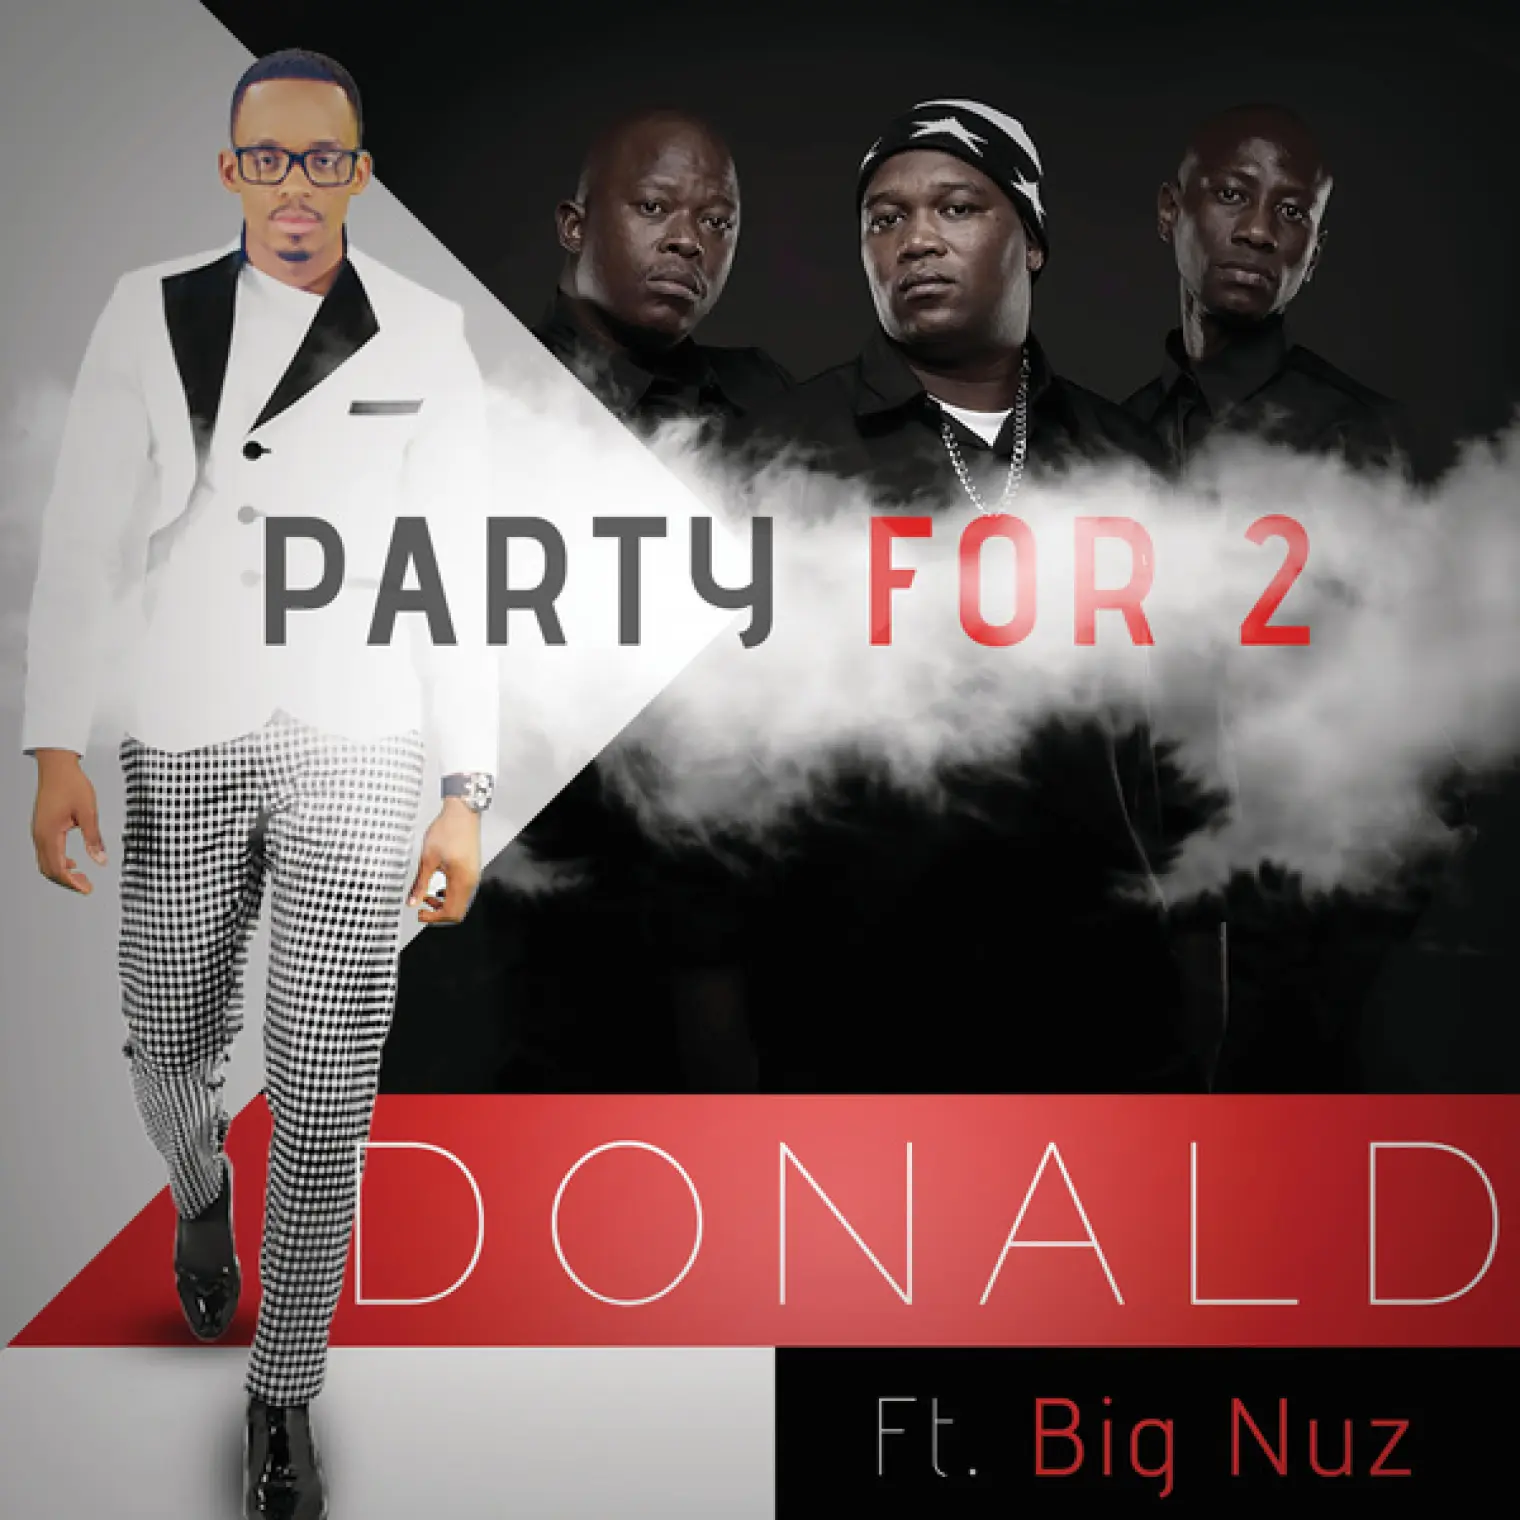 Party For 2 -  Donald 